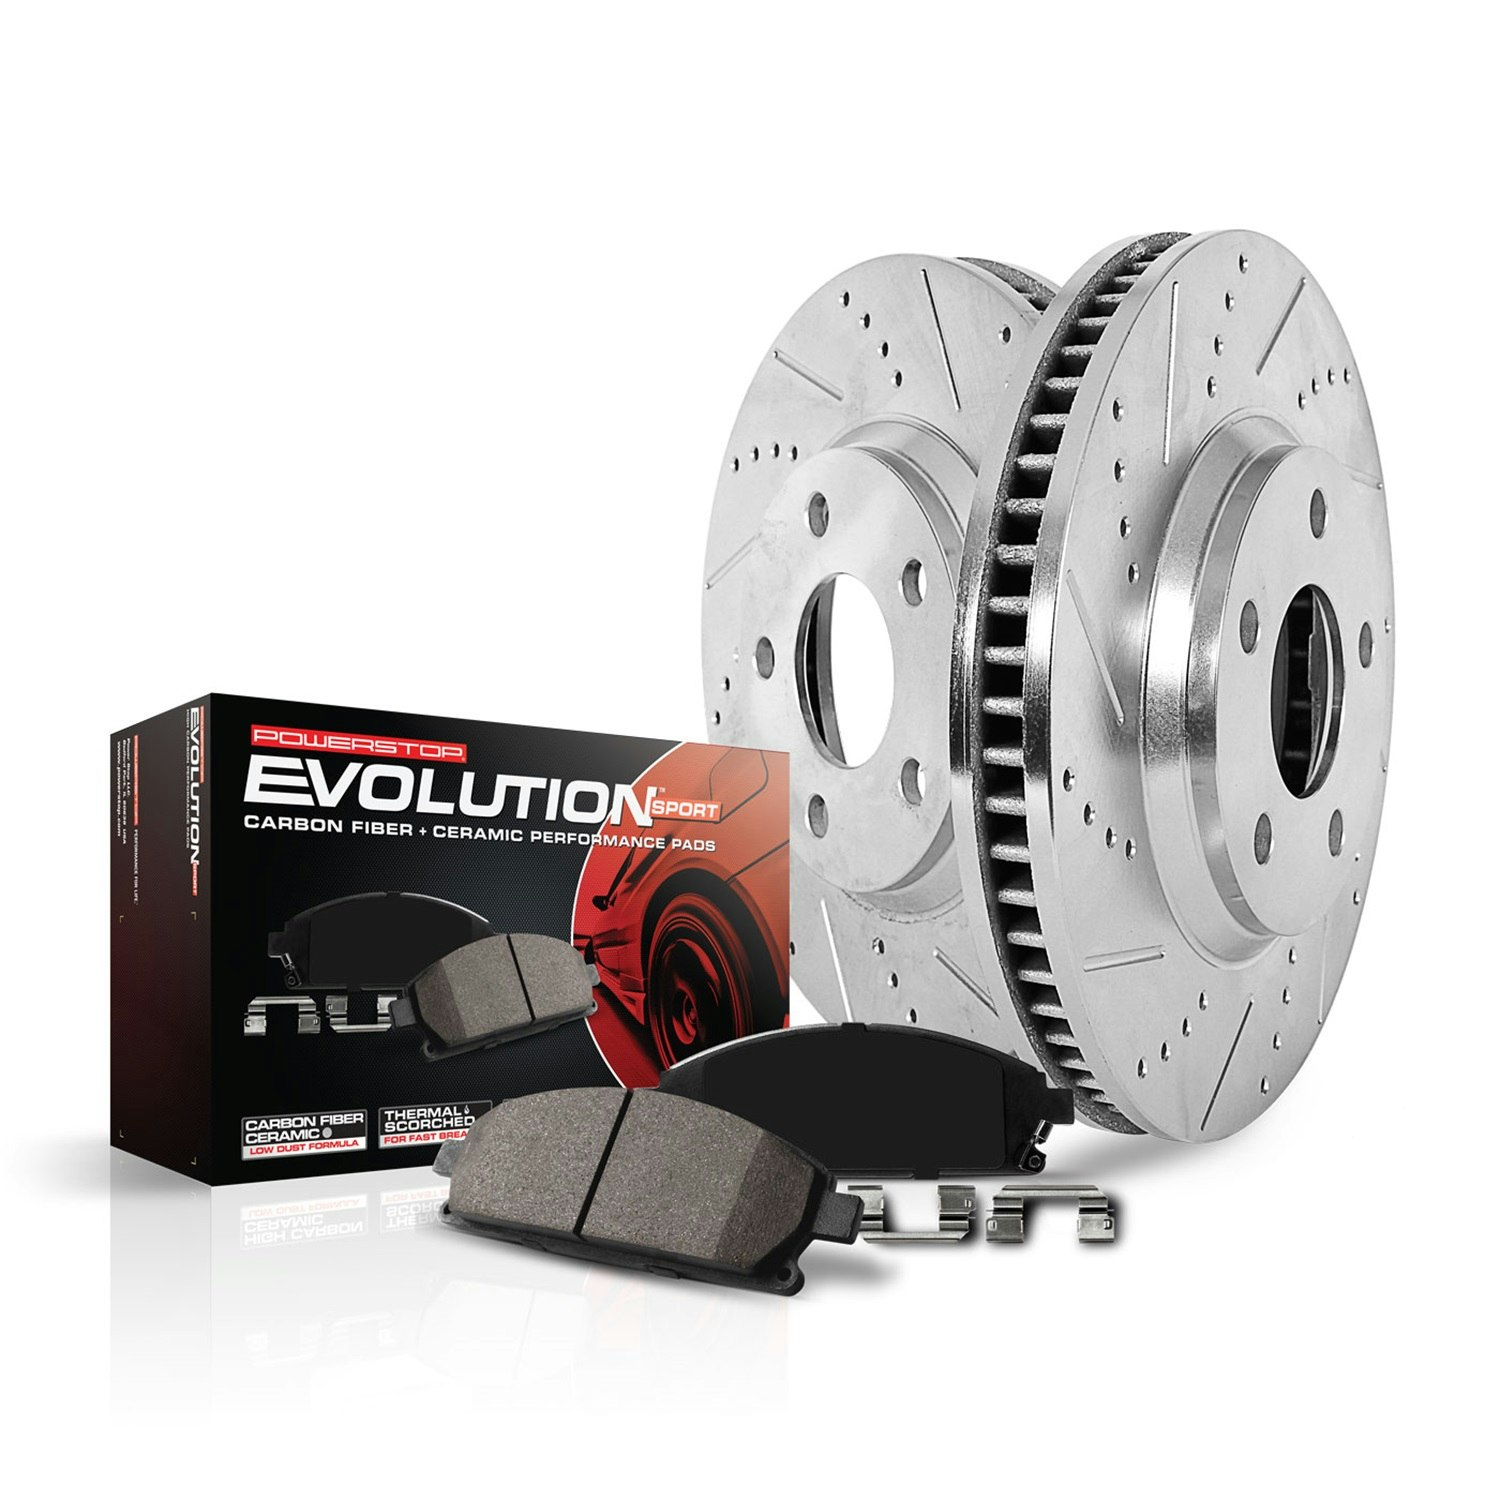 Power Stop K7340 Rear Z23 Evolution Kit with Drilled/Slotted Rotors and Ceramic Brake Pads 